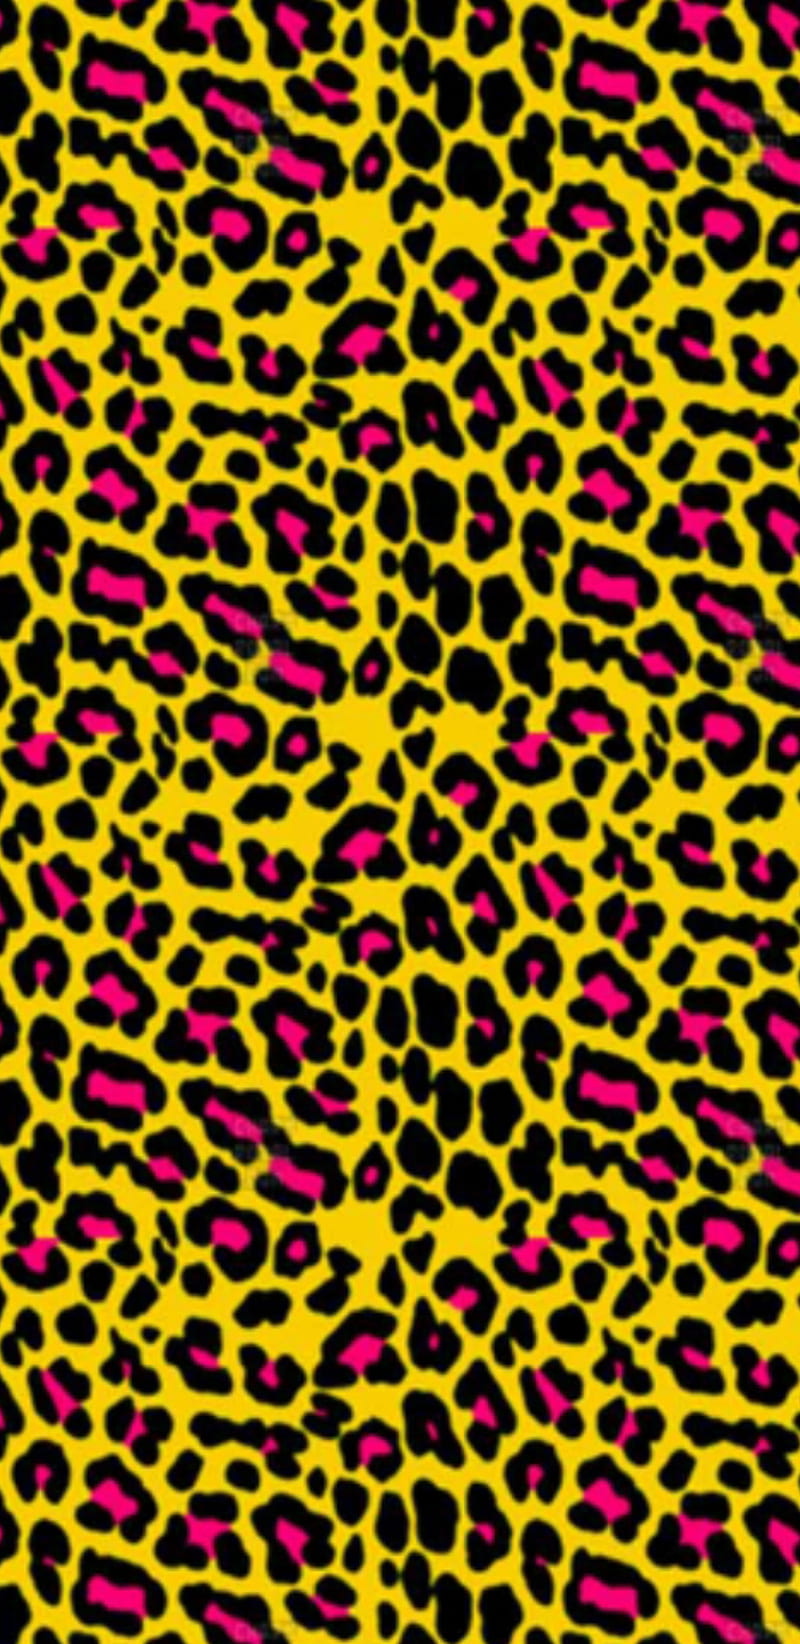 Leopard, red mouth, Rolling Stones. Leopard, Cheetah print, Animal print,  HD phone wallpaper